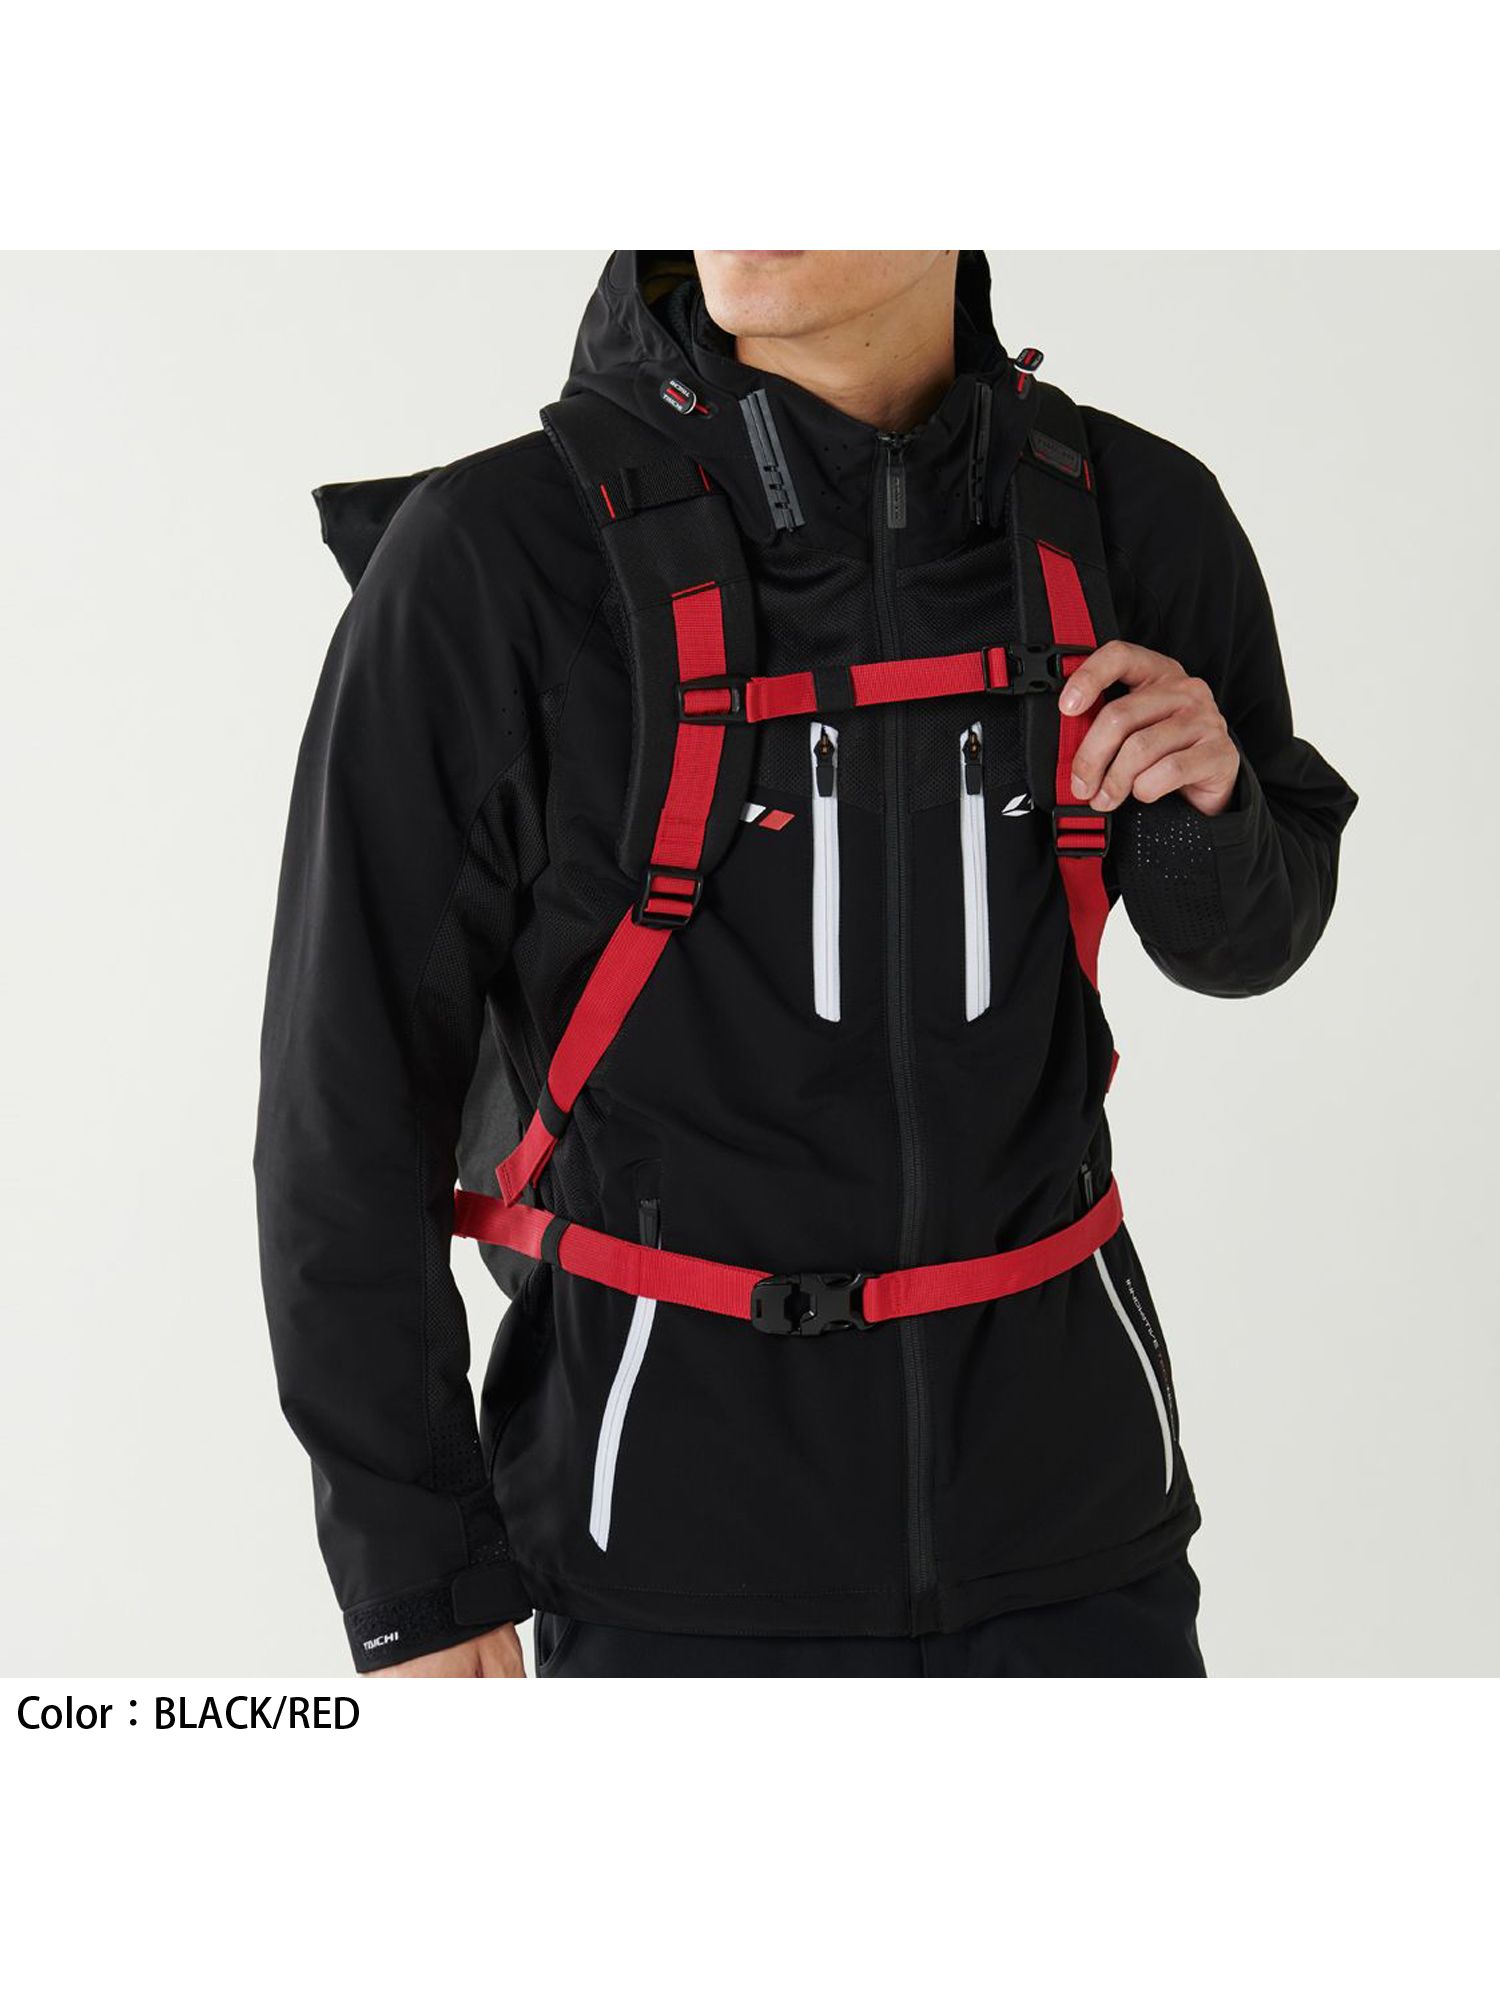 RSB278 | WP BACK PACK［5colors］